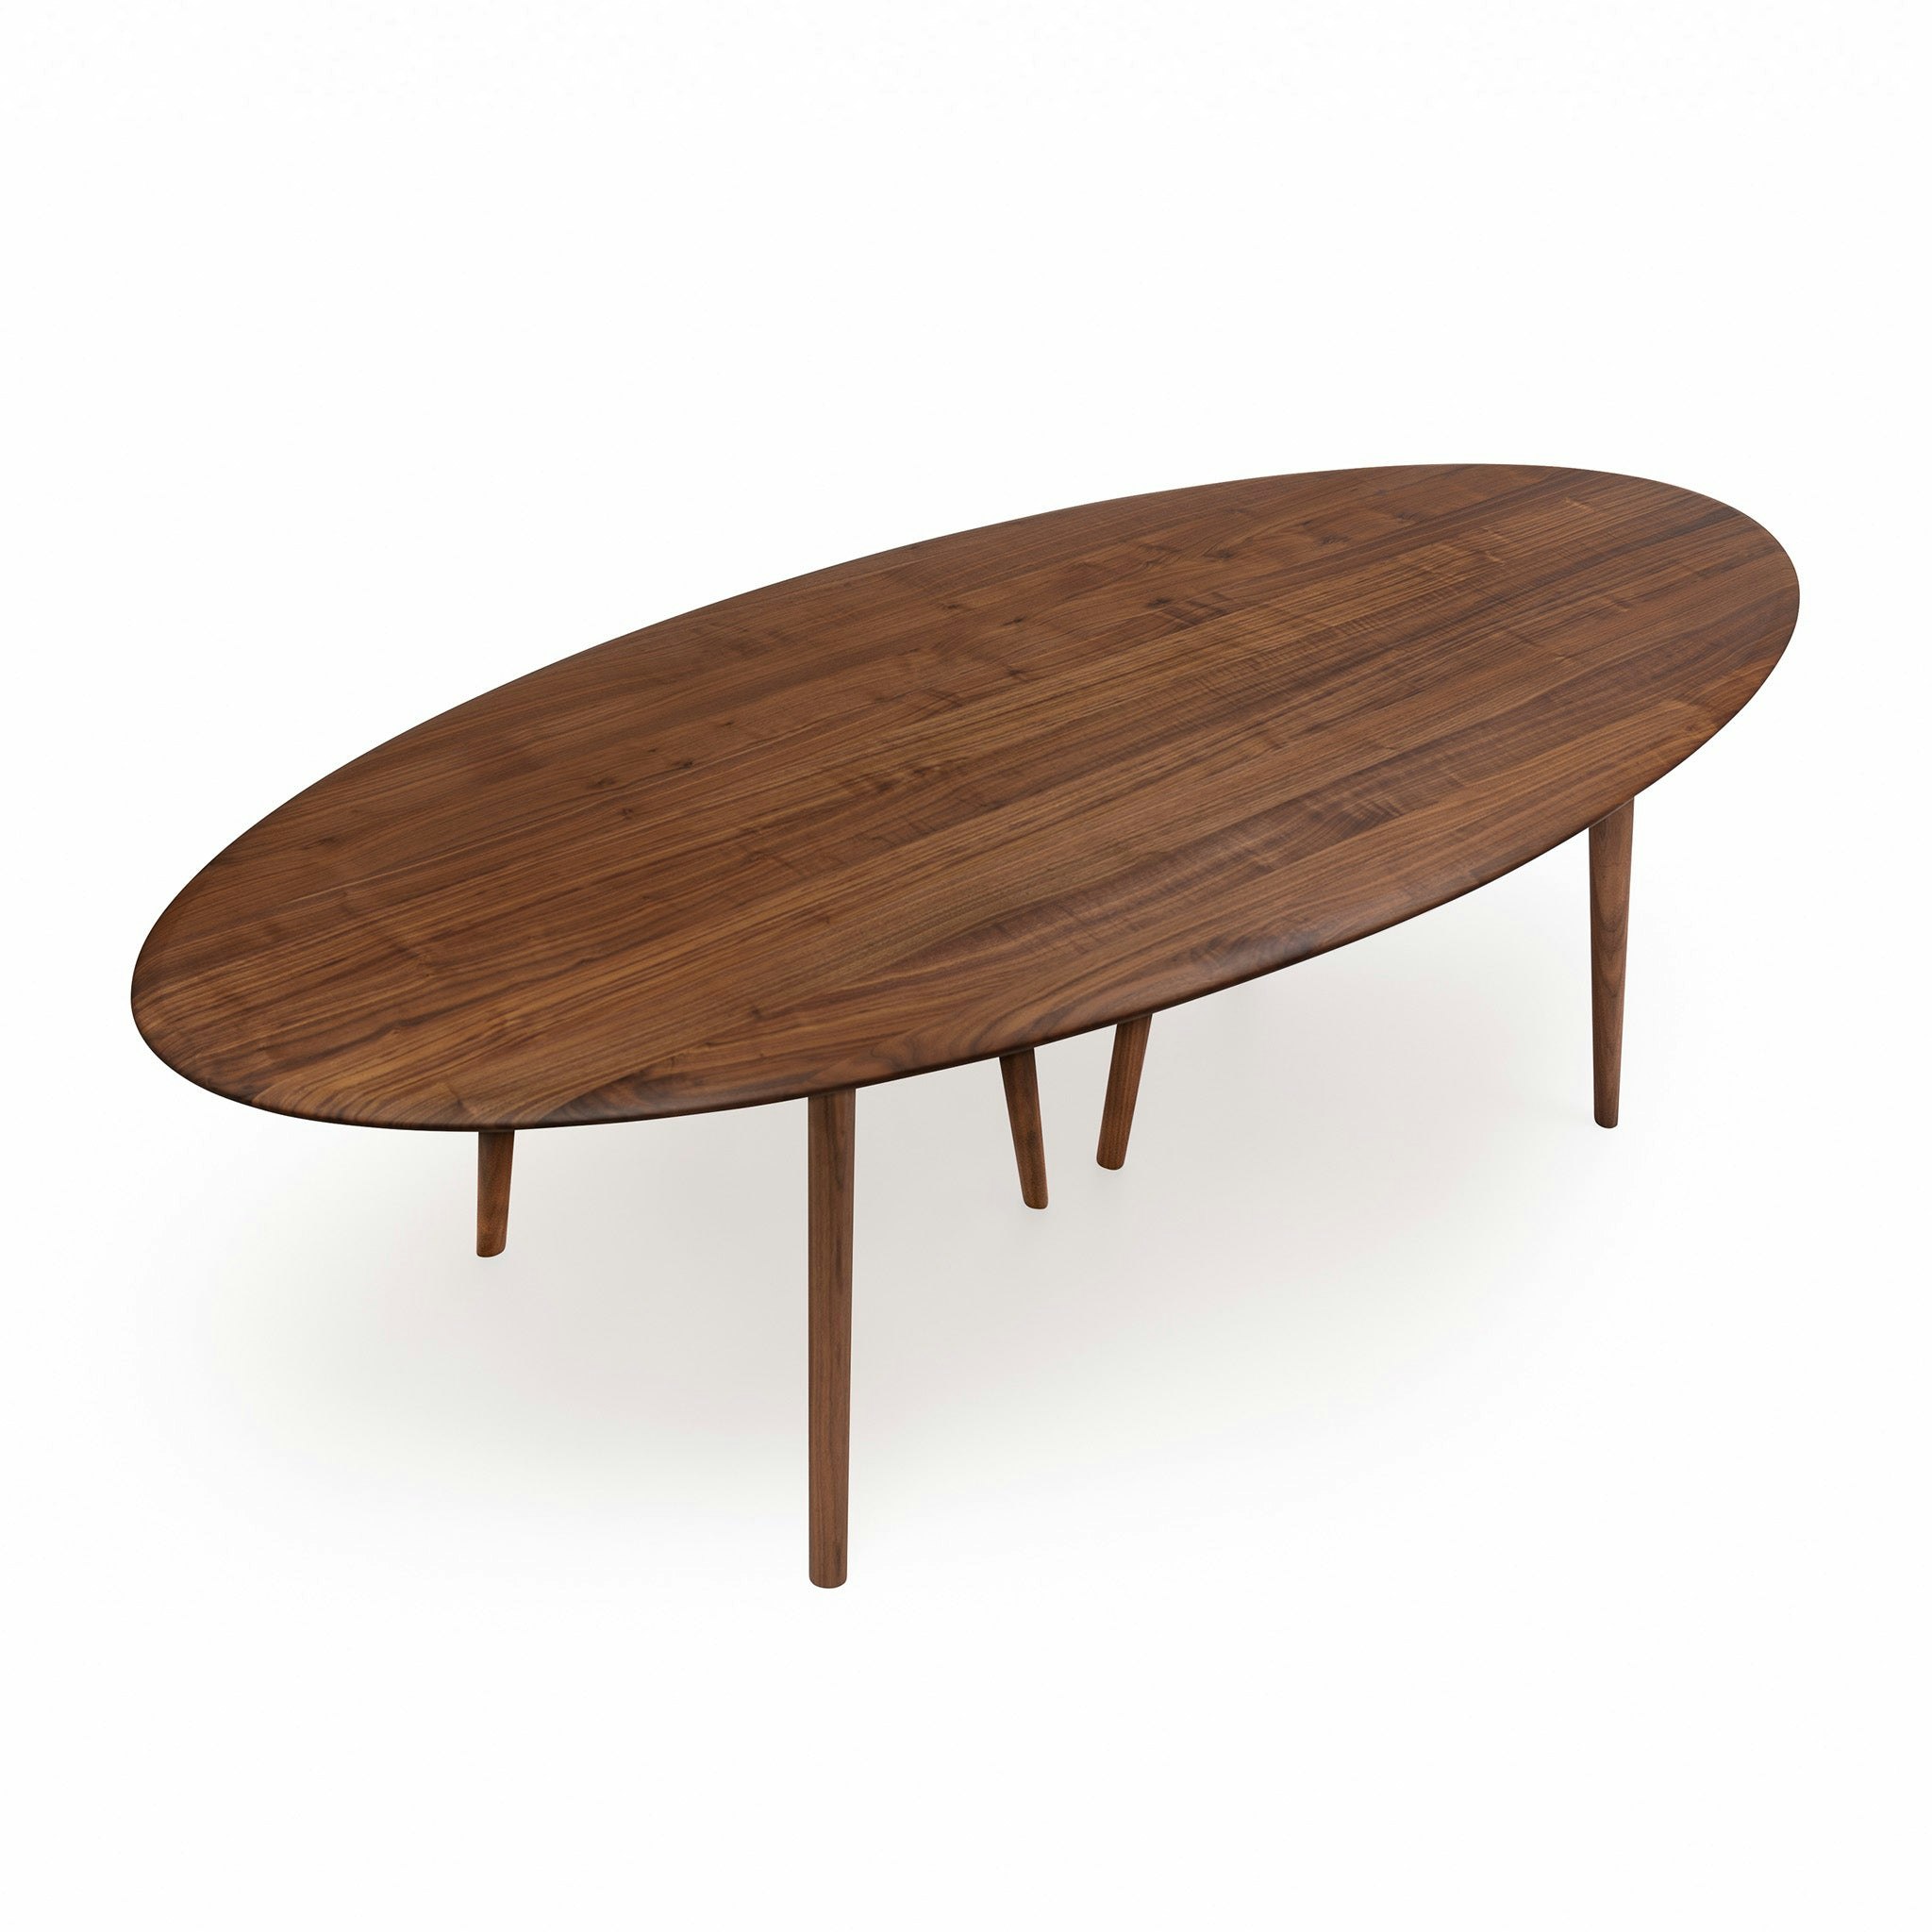 Solo Dining Table by Neri & Hu